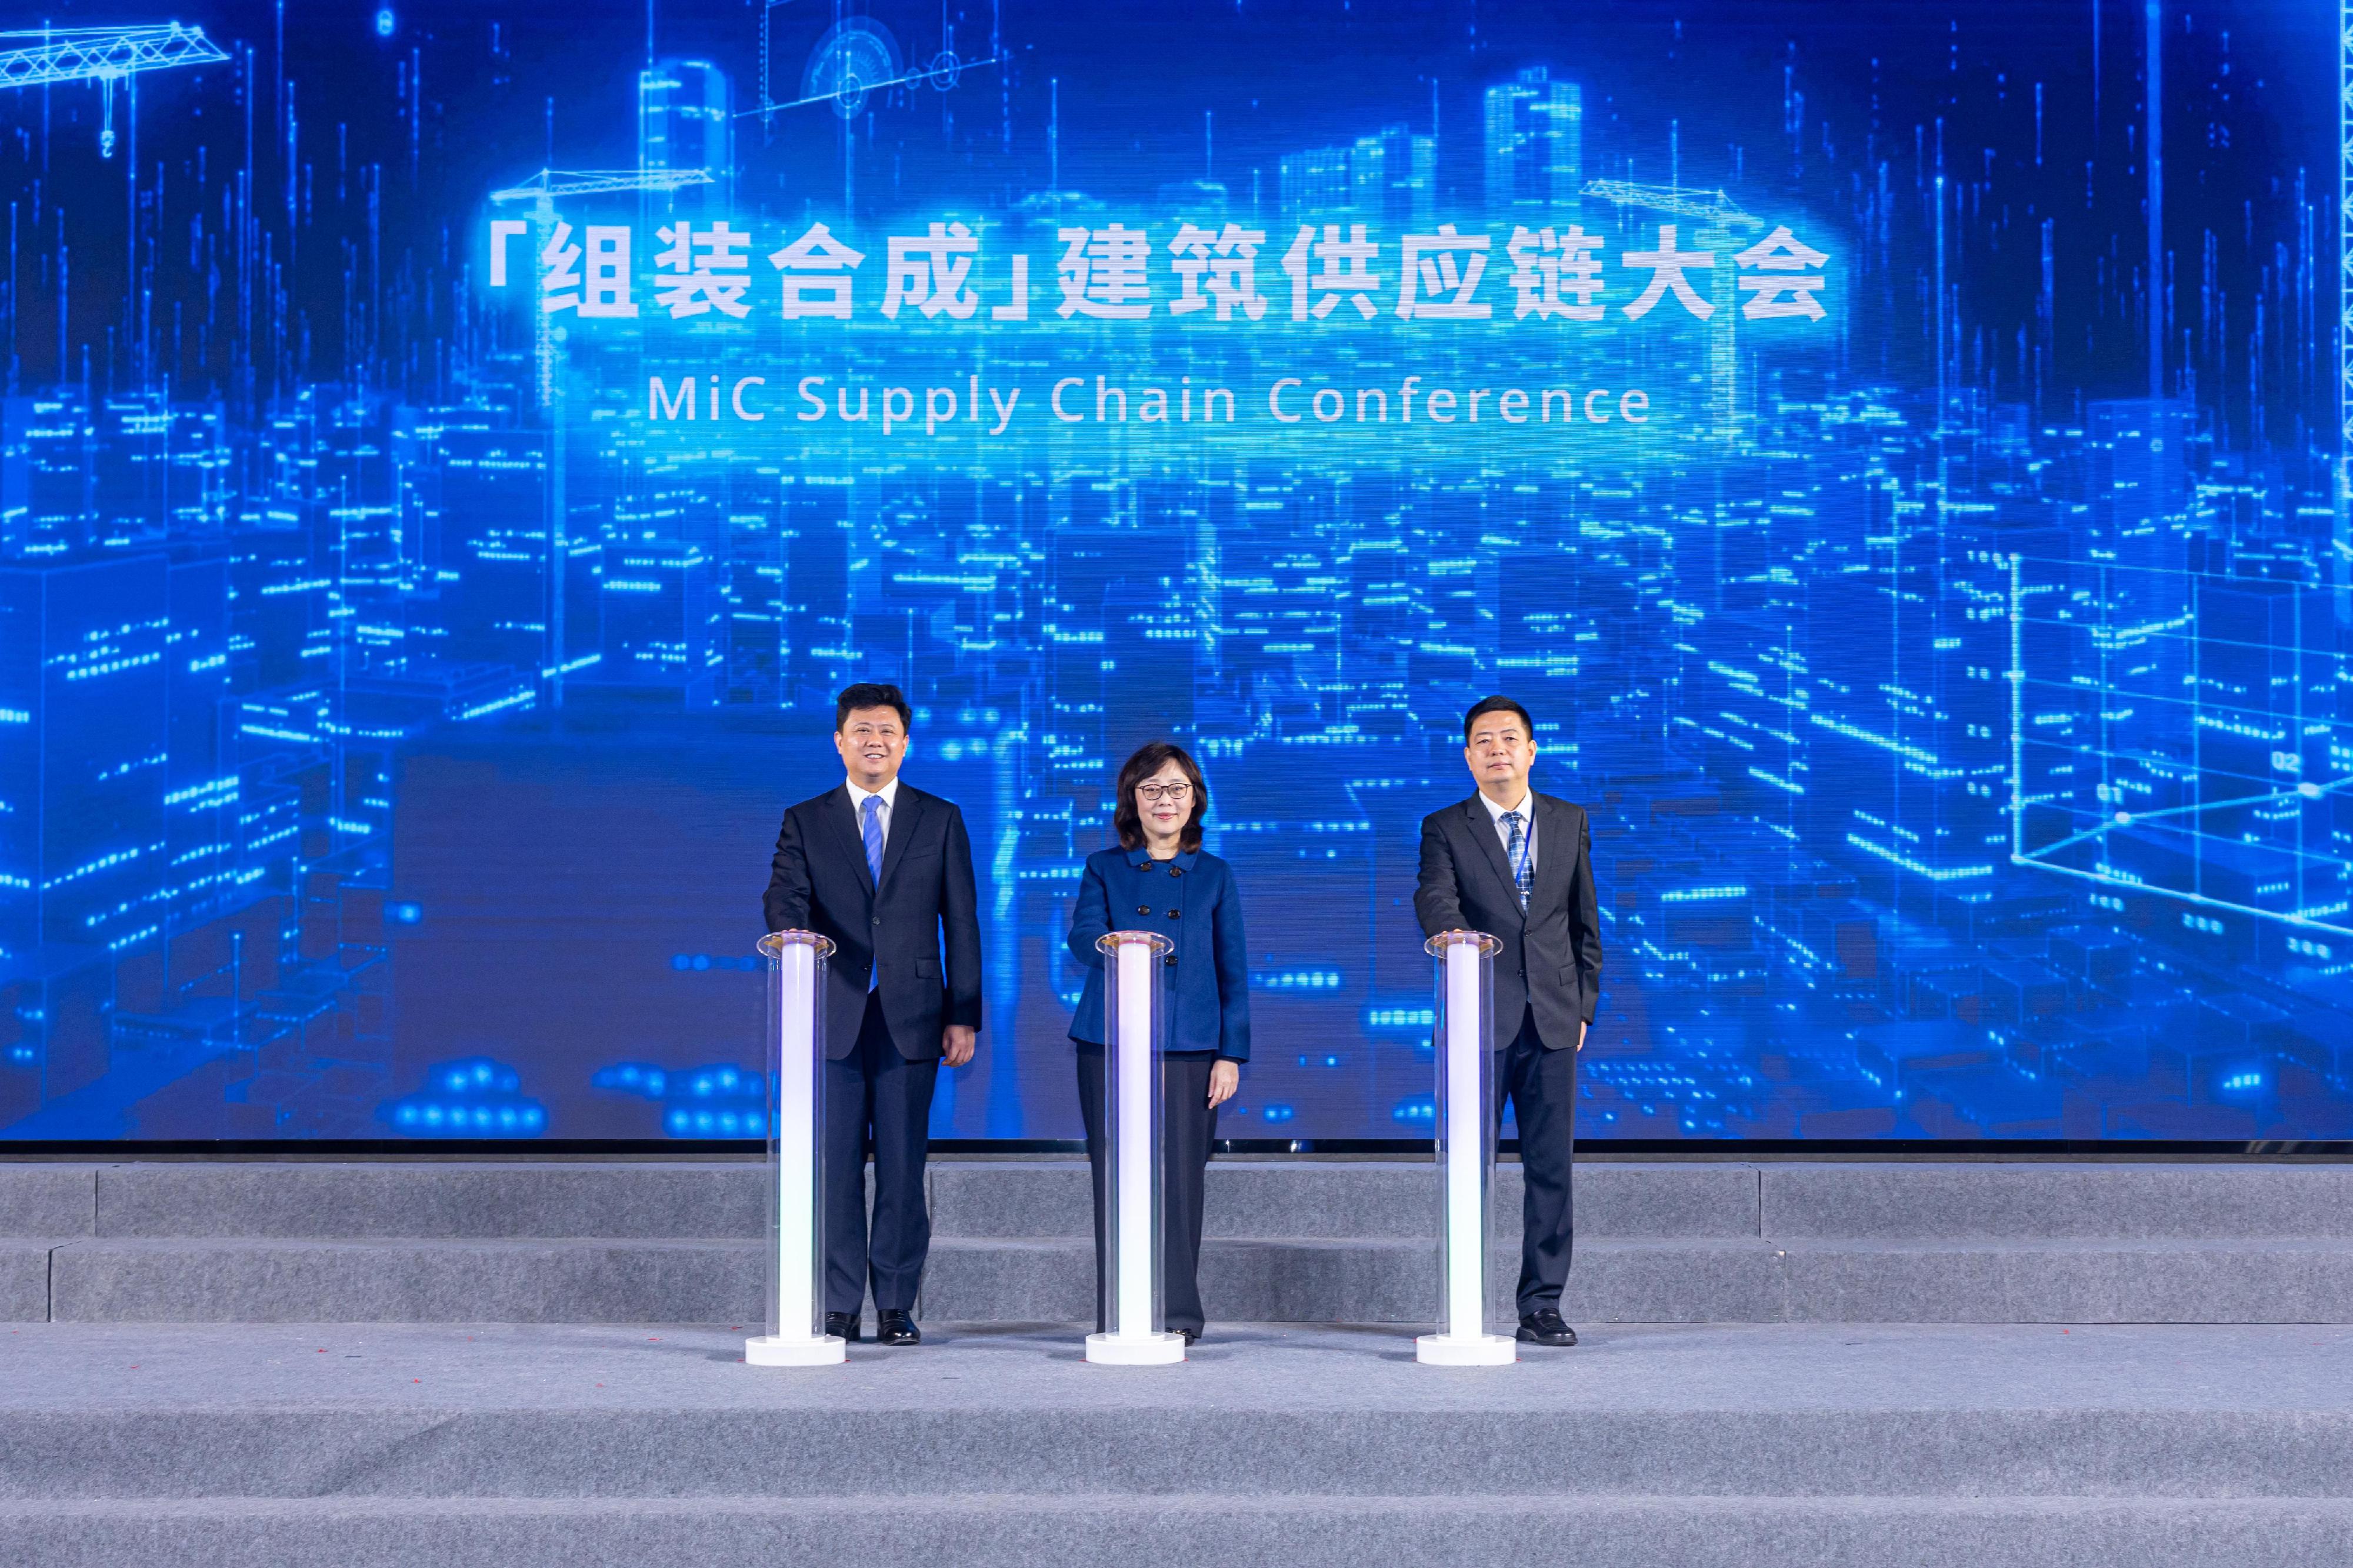 The Secretary for Development, Ms Bernadette Linn, attended the Modular Integrated Construction Supply Chain Conference in Huizhou today (January 23). Photo show Ms Linn (centre), Deputy Director-General of the Department of Housing and Urban-Rural Development of Guangdong Province Mr Yang Qinggan (right), and Deputy Mayor of the People's Government of Huizhou Municipality Mr Duan Zhihui (left) officiating at the opening ceremony.